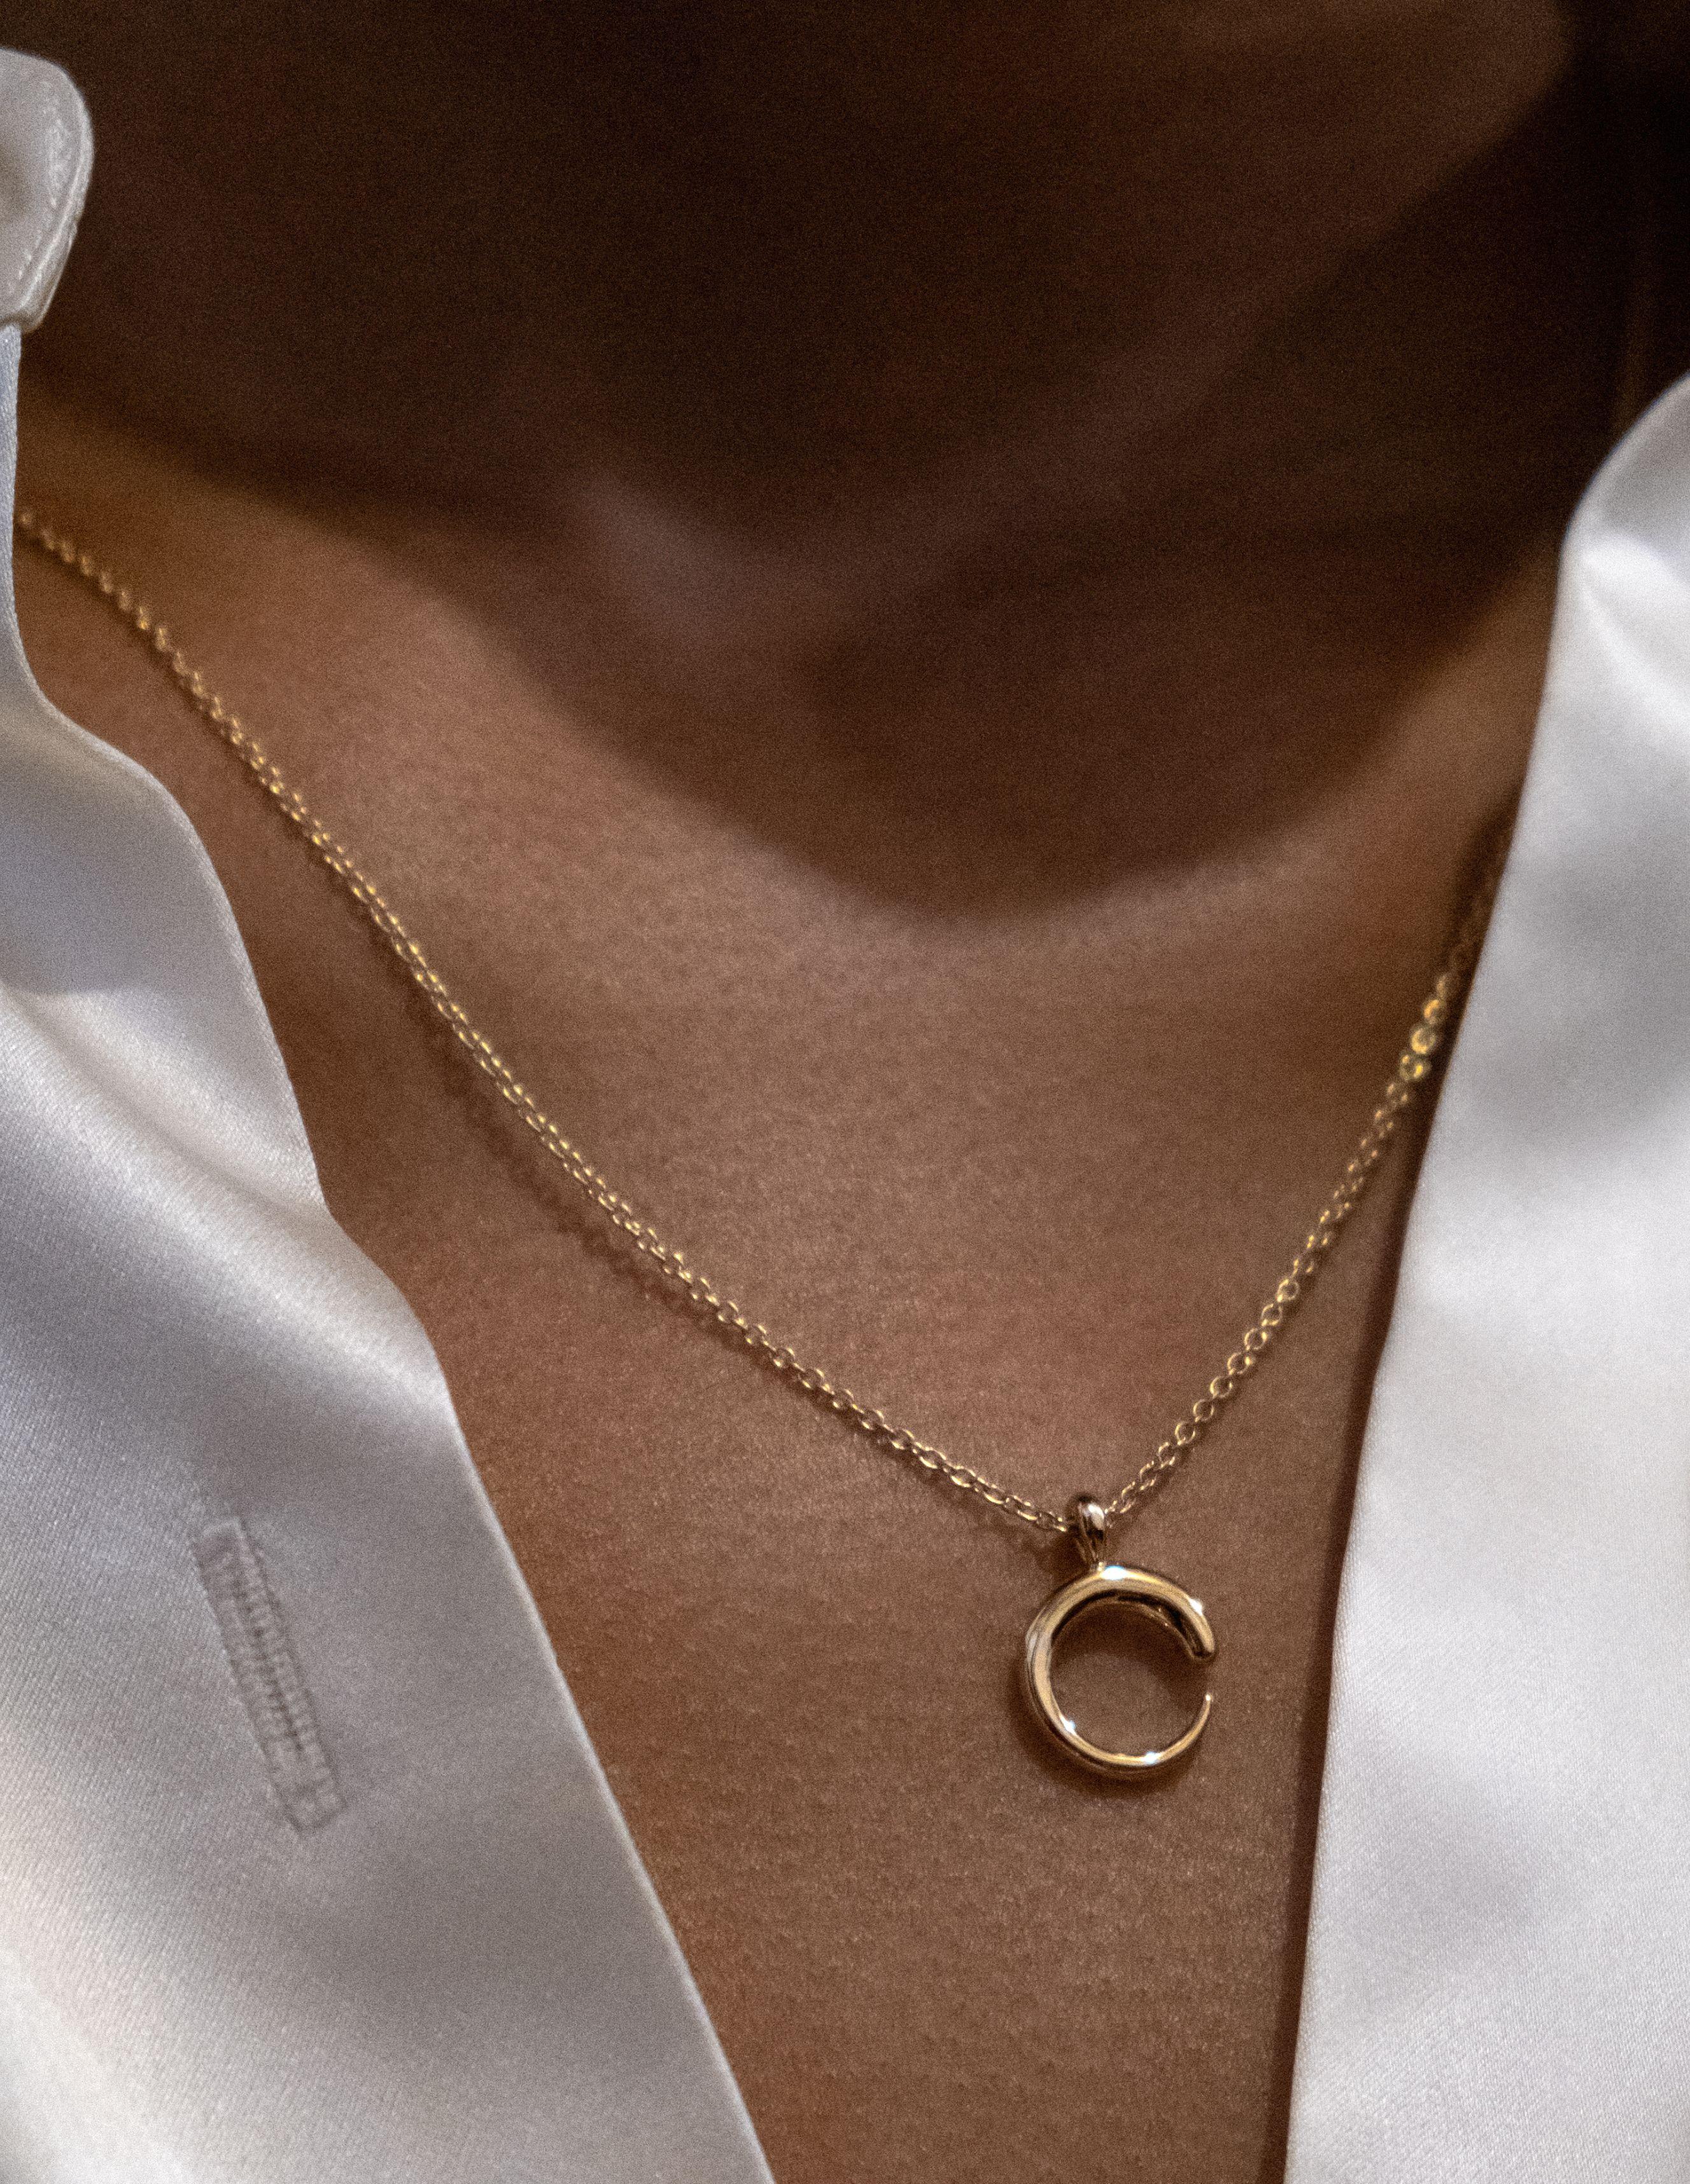 KHIRY signature Khartoum silhouette nude pendant in 18K Gold. Inspired by long horned cattle that are a store of value and wealth in Sudan, polished and minimal. 0.5 inch pendant on with 18-20 inch adjustable link chain with lobster clasp.


This